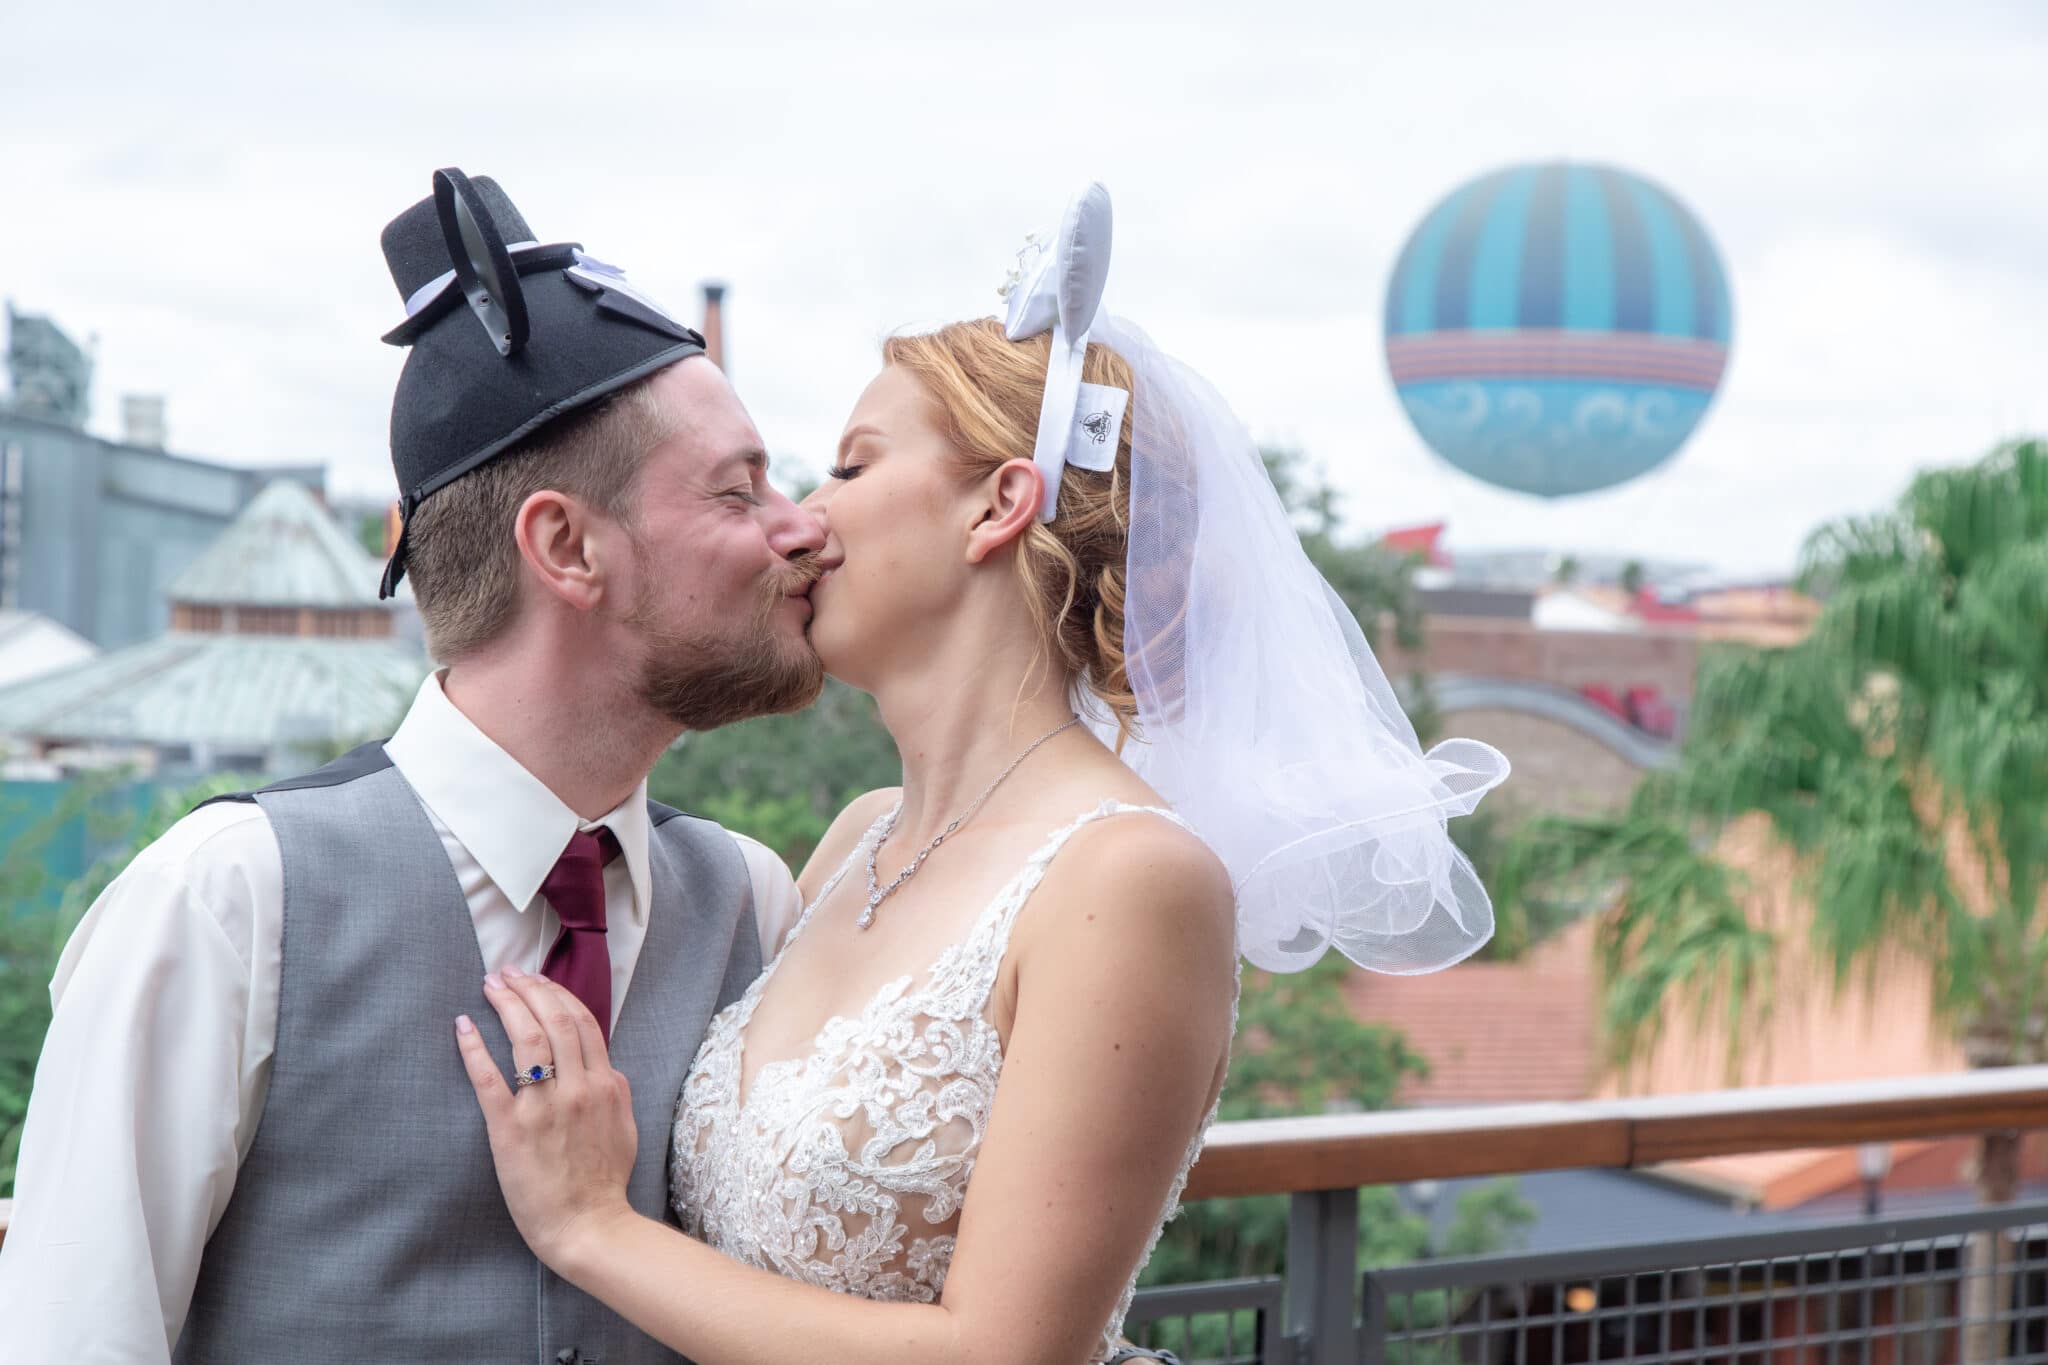 bride and groom kissing with mickey and minnie wedding ears in front of hot air balloon at disney springs florida